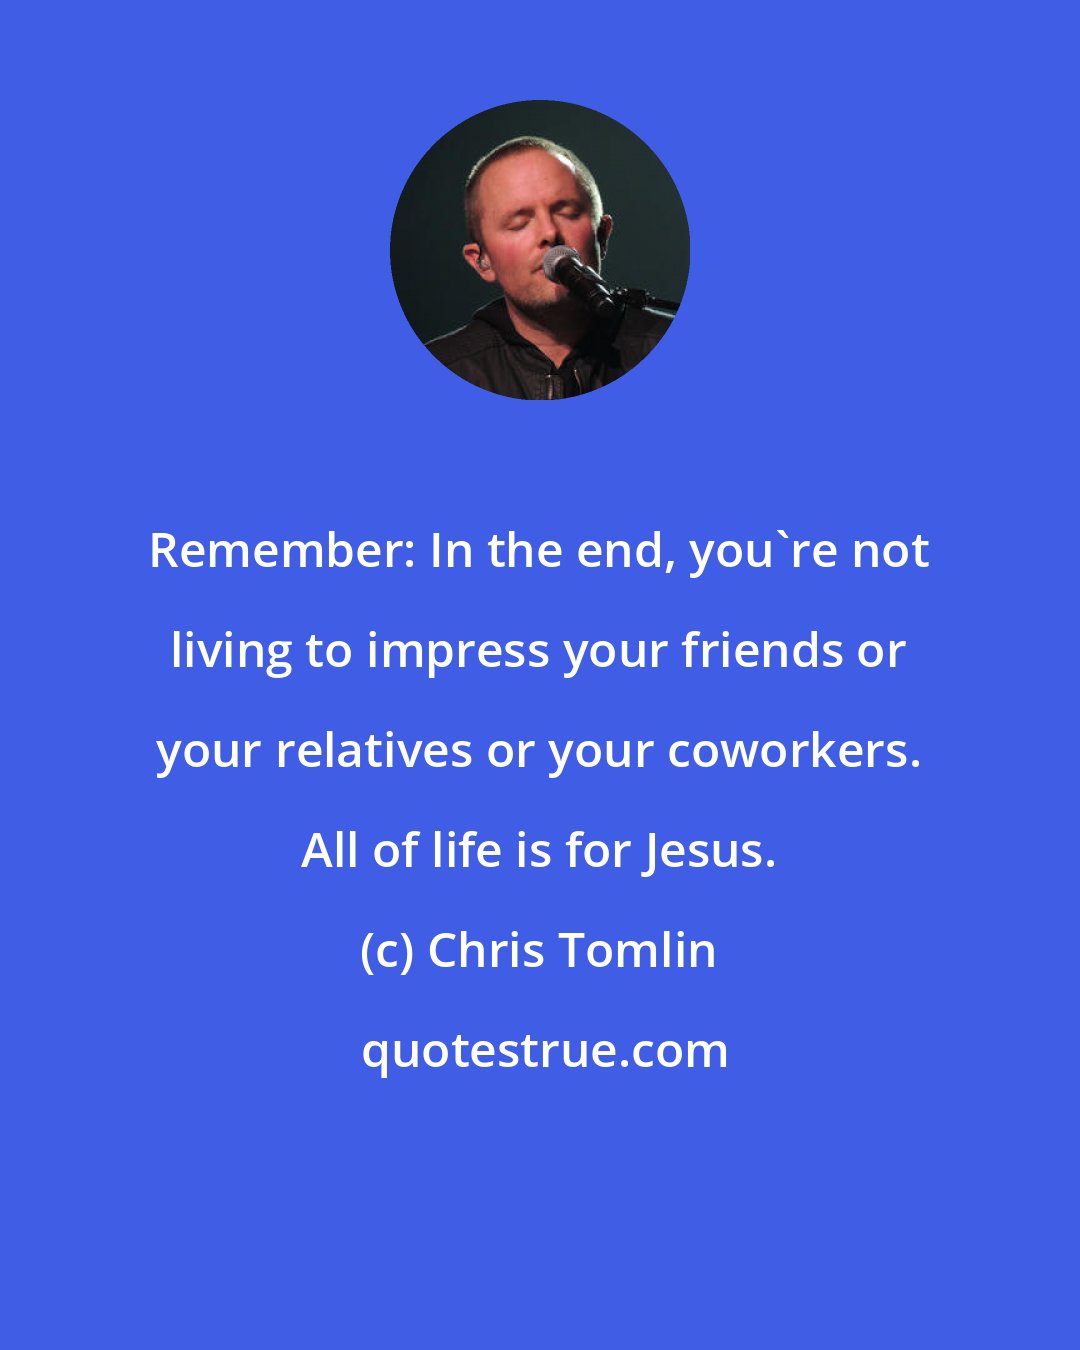 Chris Tomlin: Remember: In the end, you're not living to impress your friends or your relatives or your coworkers. All of life is for Jesus.